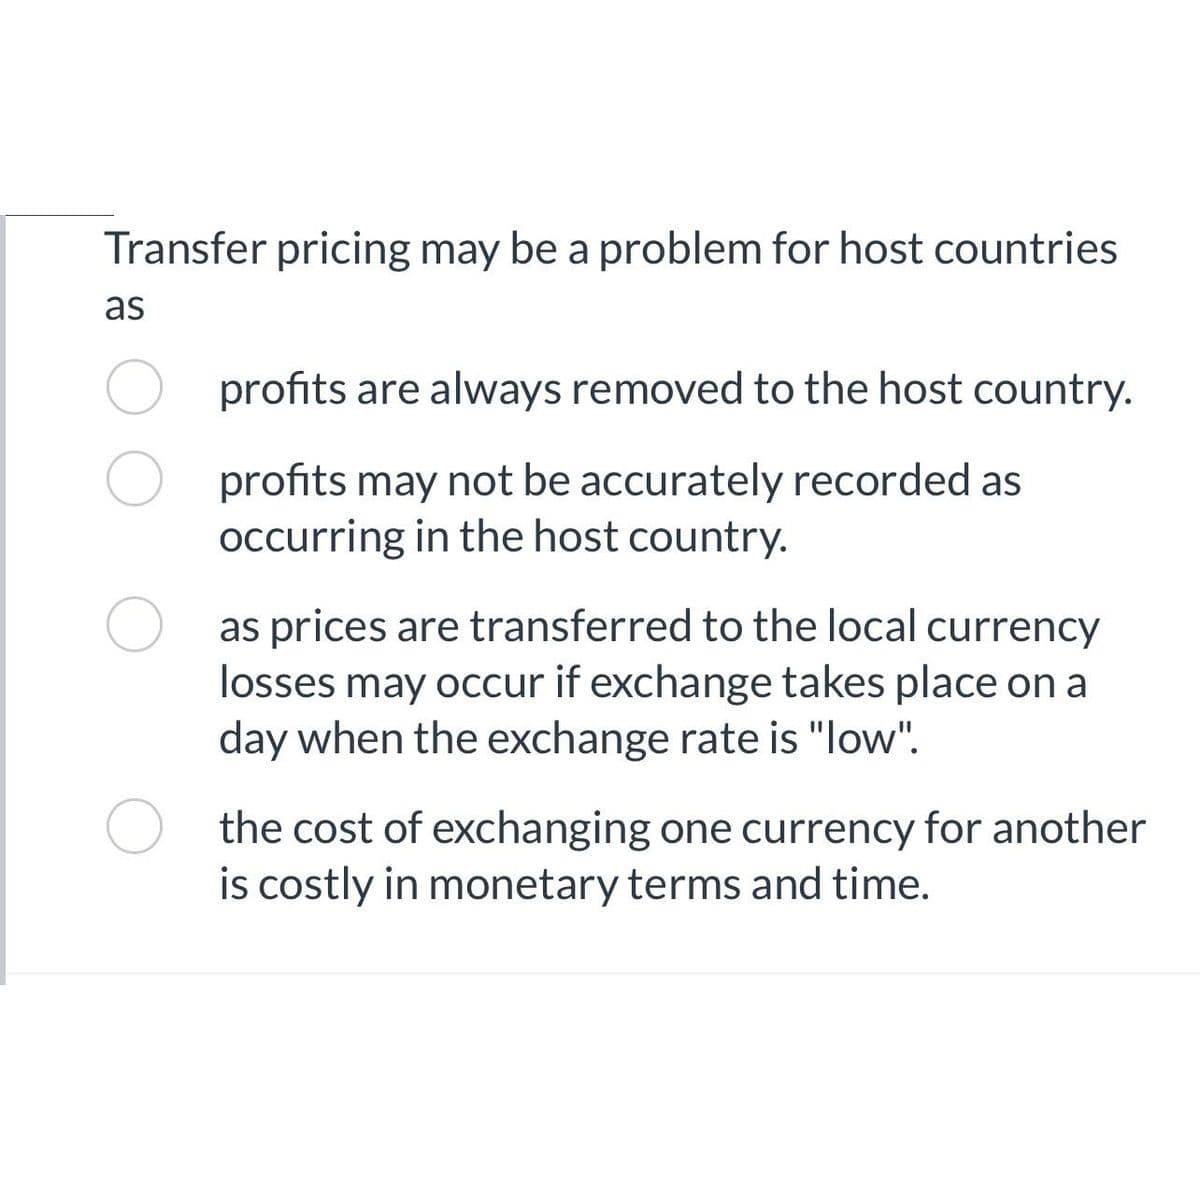 Transfer pricing may be a problem for host countries
as
profits are always removed to the host country.
profits may not be accurately recorded as
occurring in the host country.
as prices are transferred to the local currency
losses may occur if exchange takes place on a
day when the exchange rate is "low".
the cost of exchanging one currency for another
is costly in monetary terms and time.